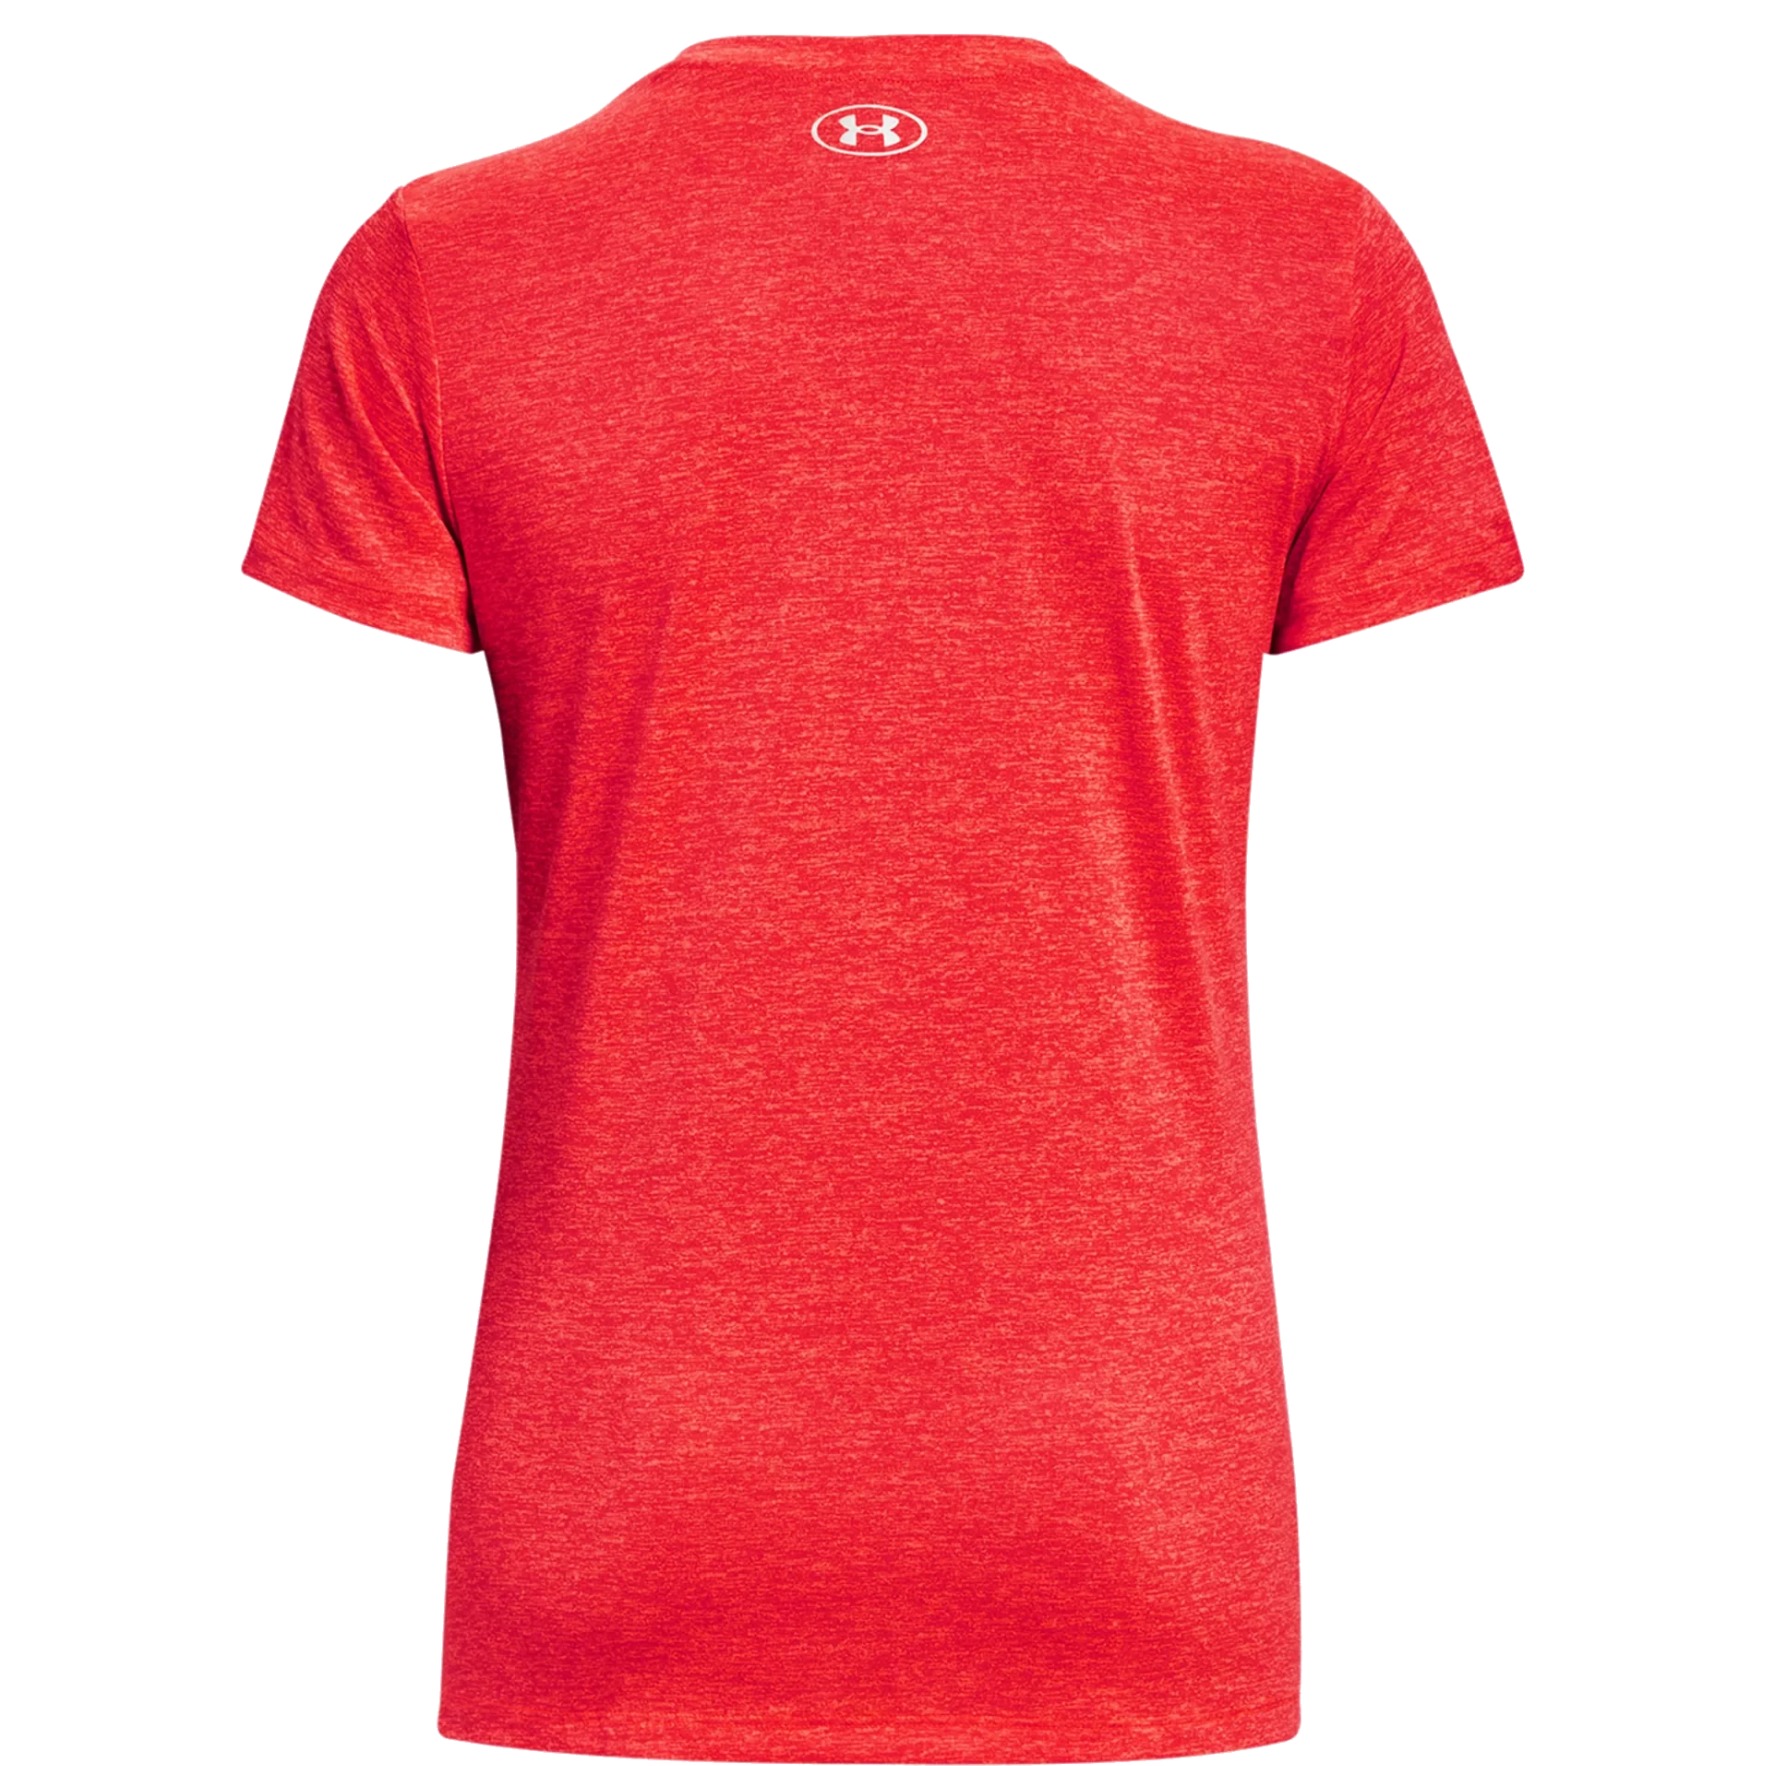 Under Armour TECH TWIST - Sports T-shirt - red solstice/coho/white